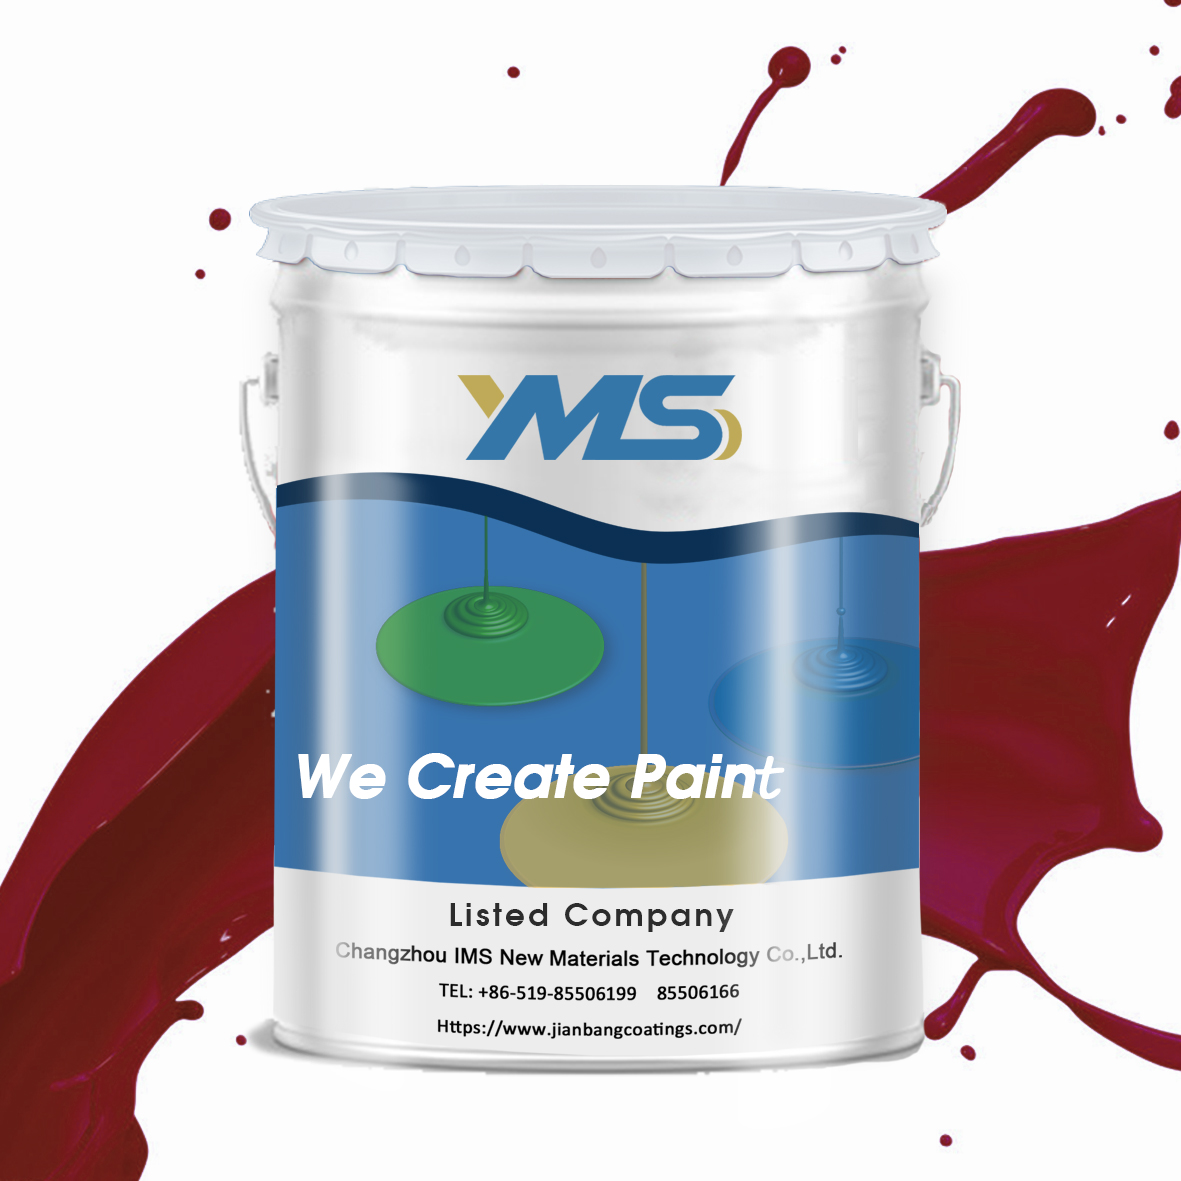 YMS Paint High-quality awlgrip marine paint Supply wall-2